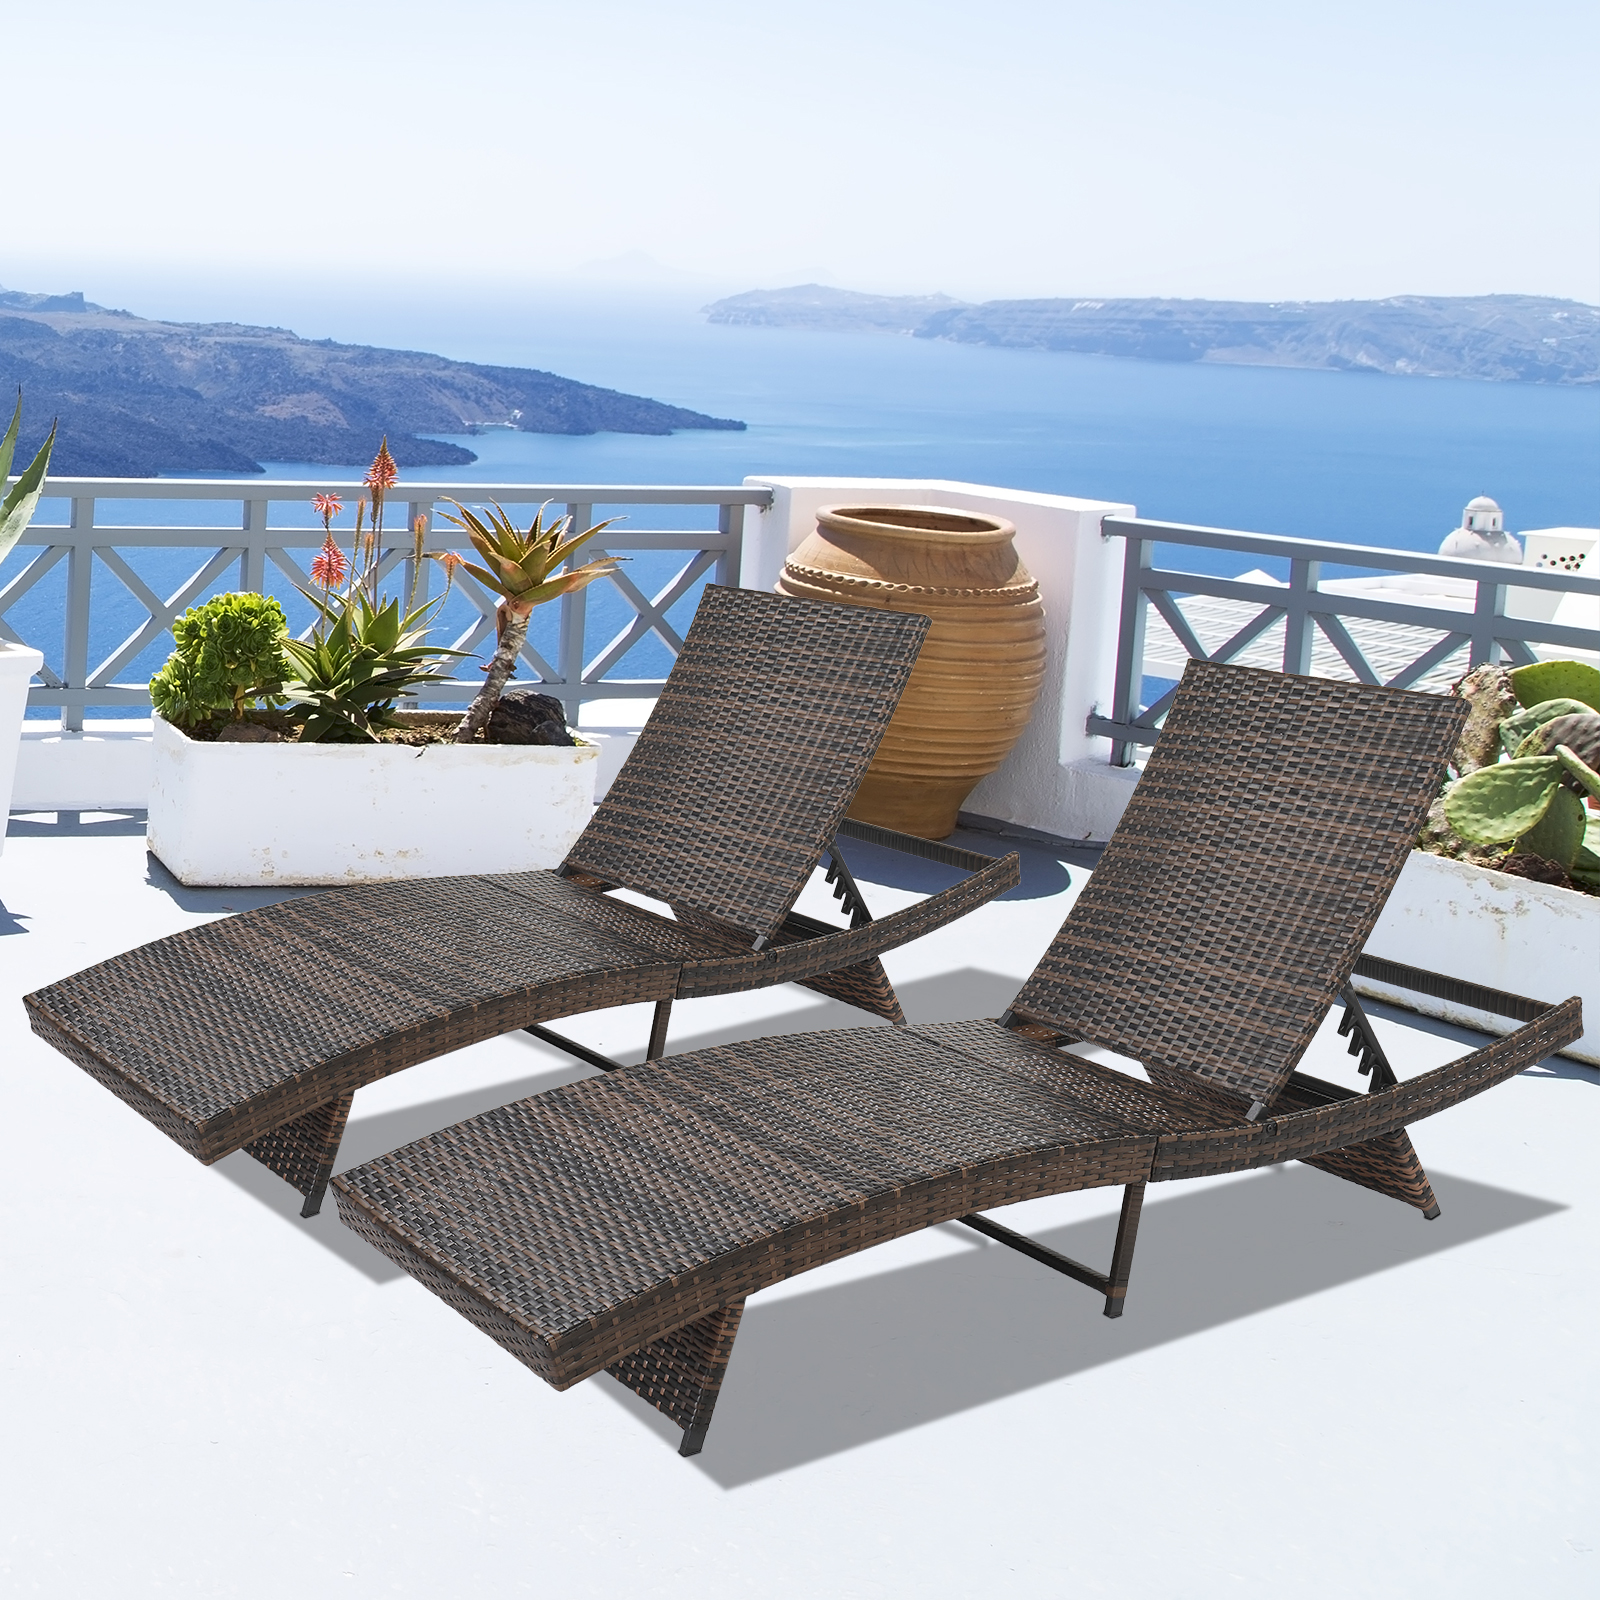 iTopRoad Products Aluminum Adjustable Chaise Lounge Chair with Cushion - image 3 of 6